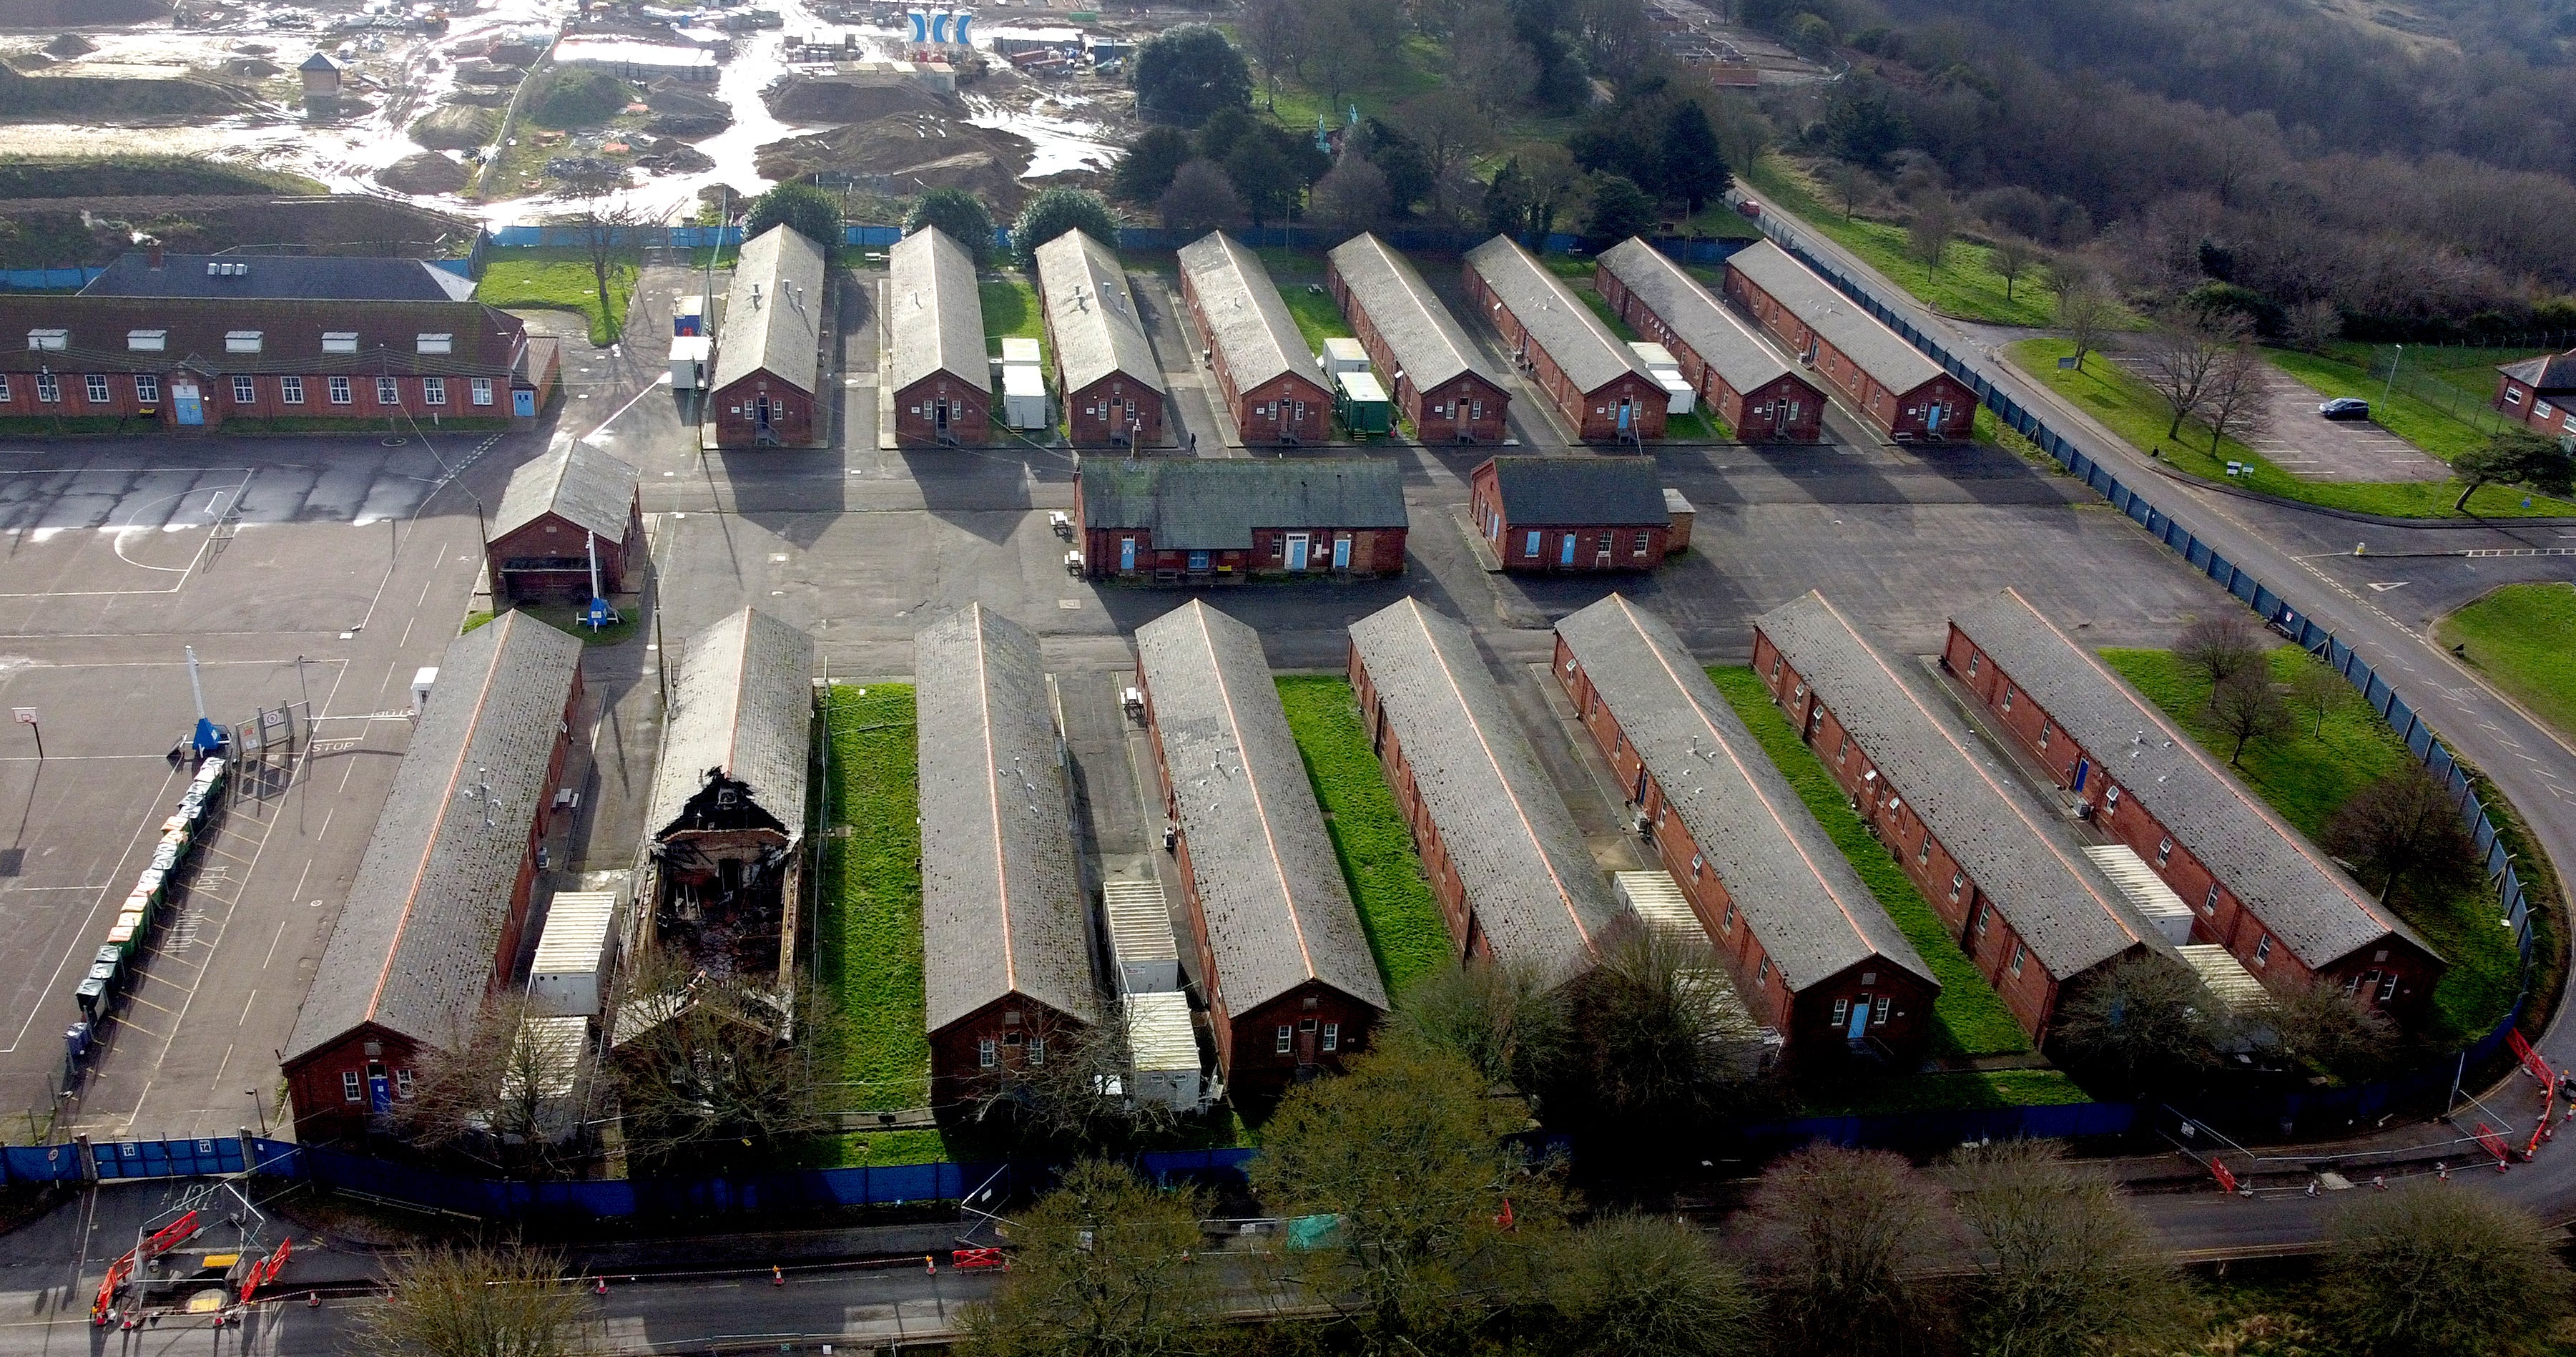 A view of Napier Barracks in Folkestone, Kent, which is being used by the government to house those seeking asylum in the UK